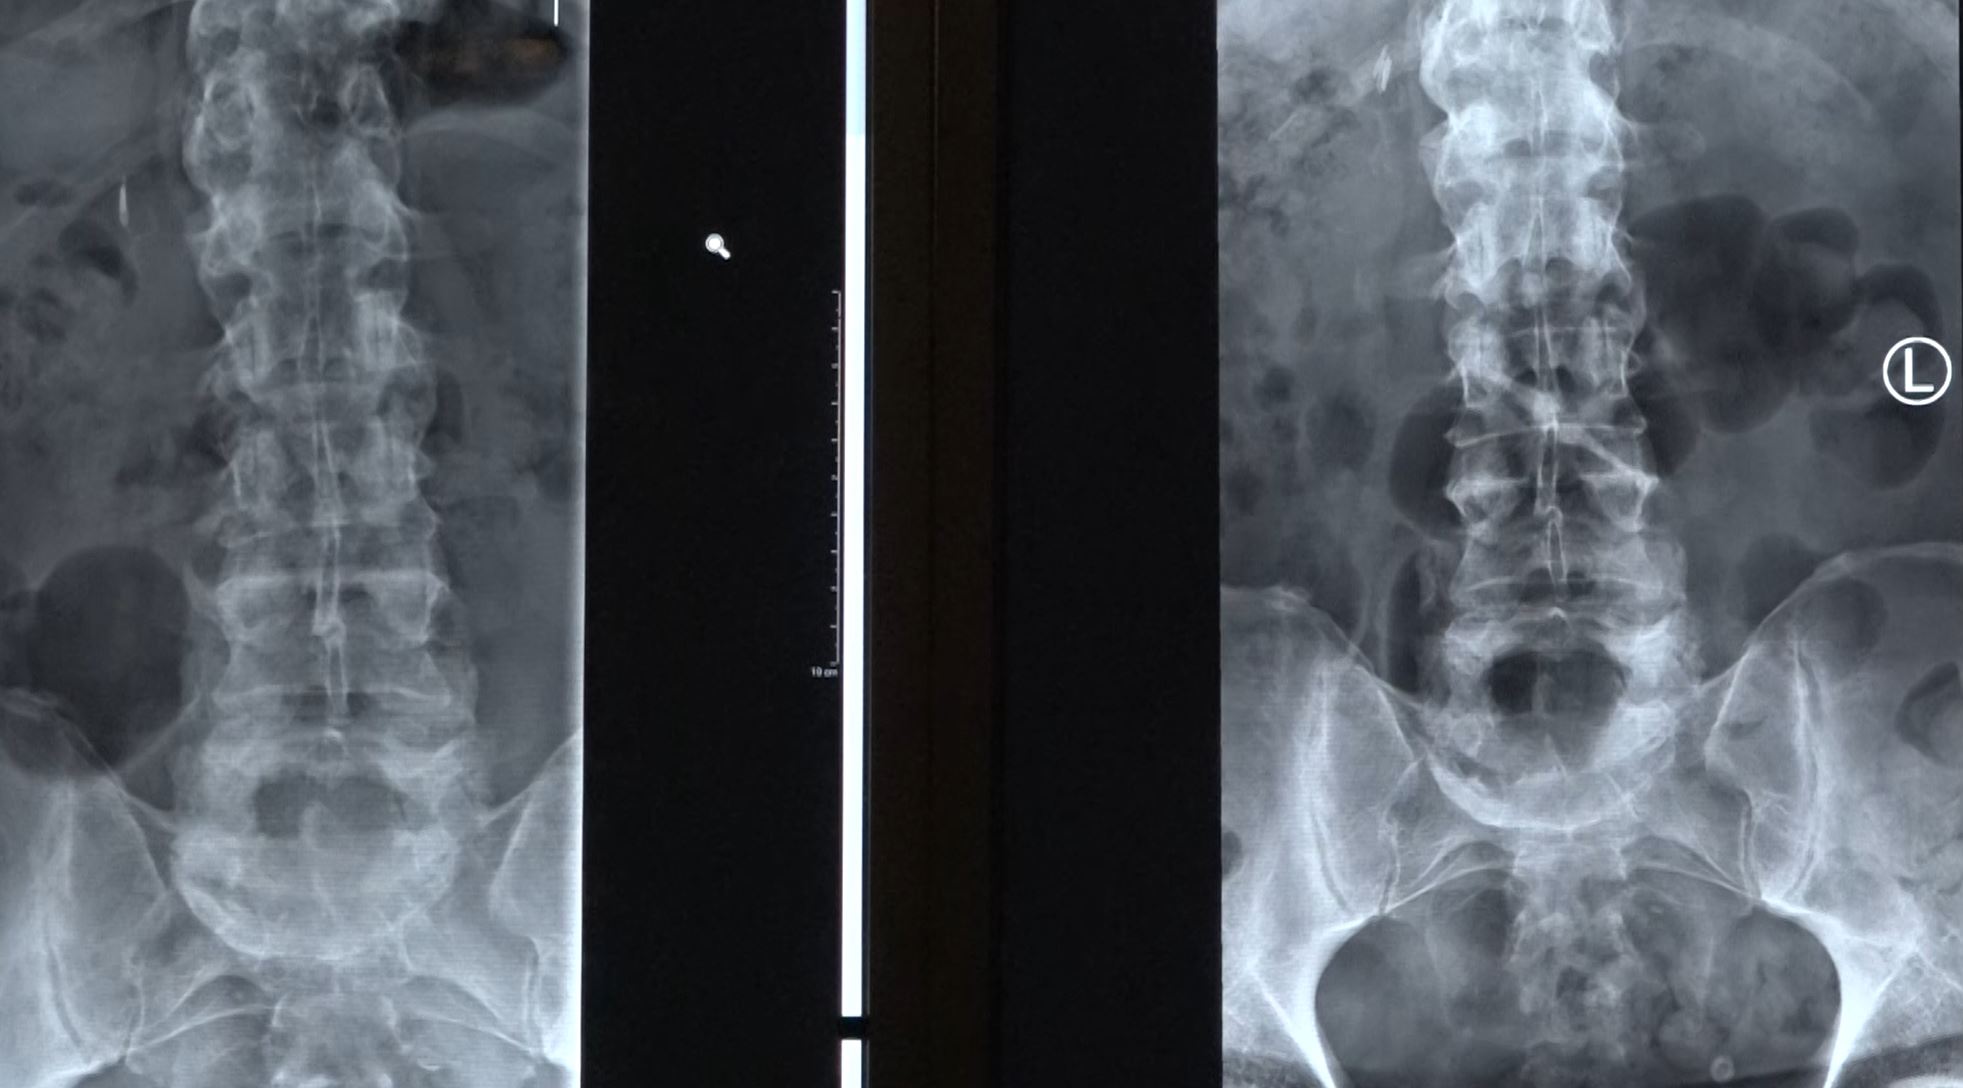 X-ray images showing two views of the lumbar spine, with visible vertebrae and soft tissues. The image on the left appears to have a small, opaque object.